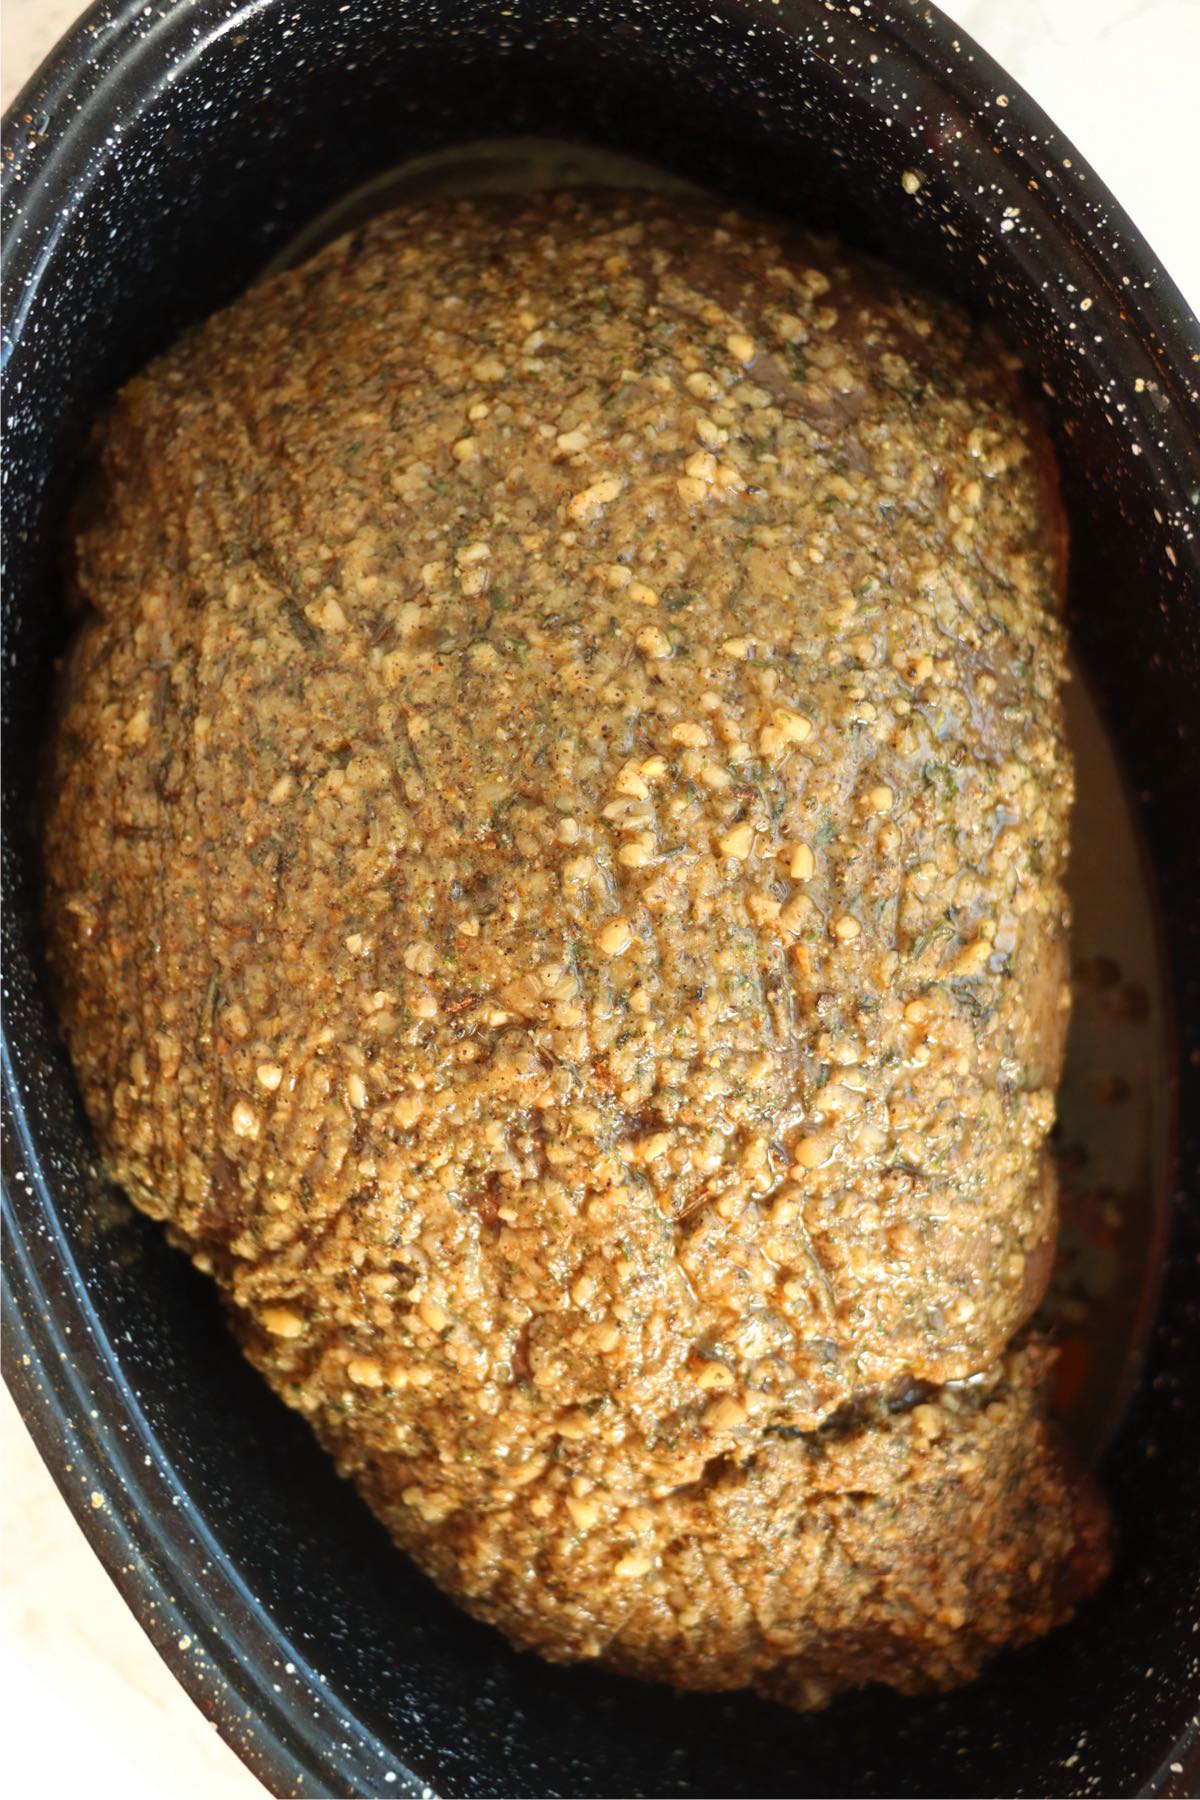 Sirloin tip roast rubbed with spices in a baking pan